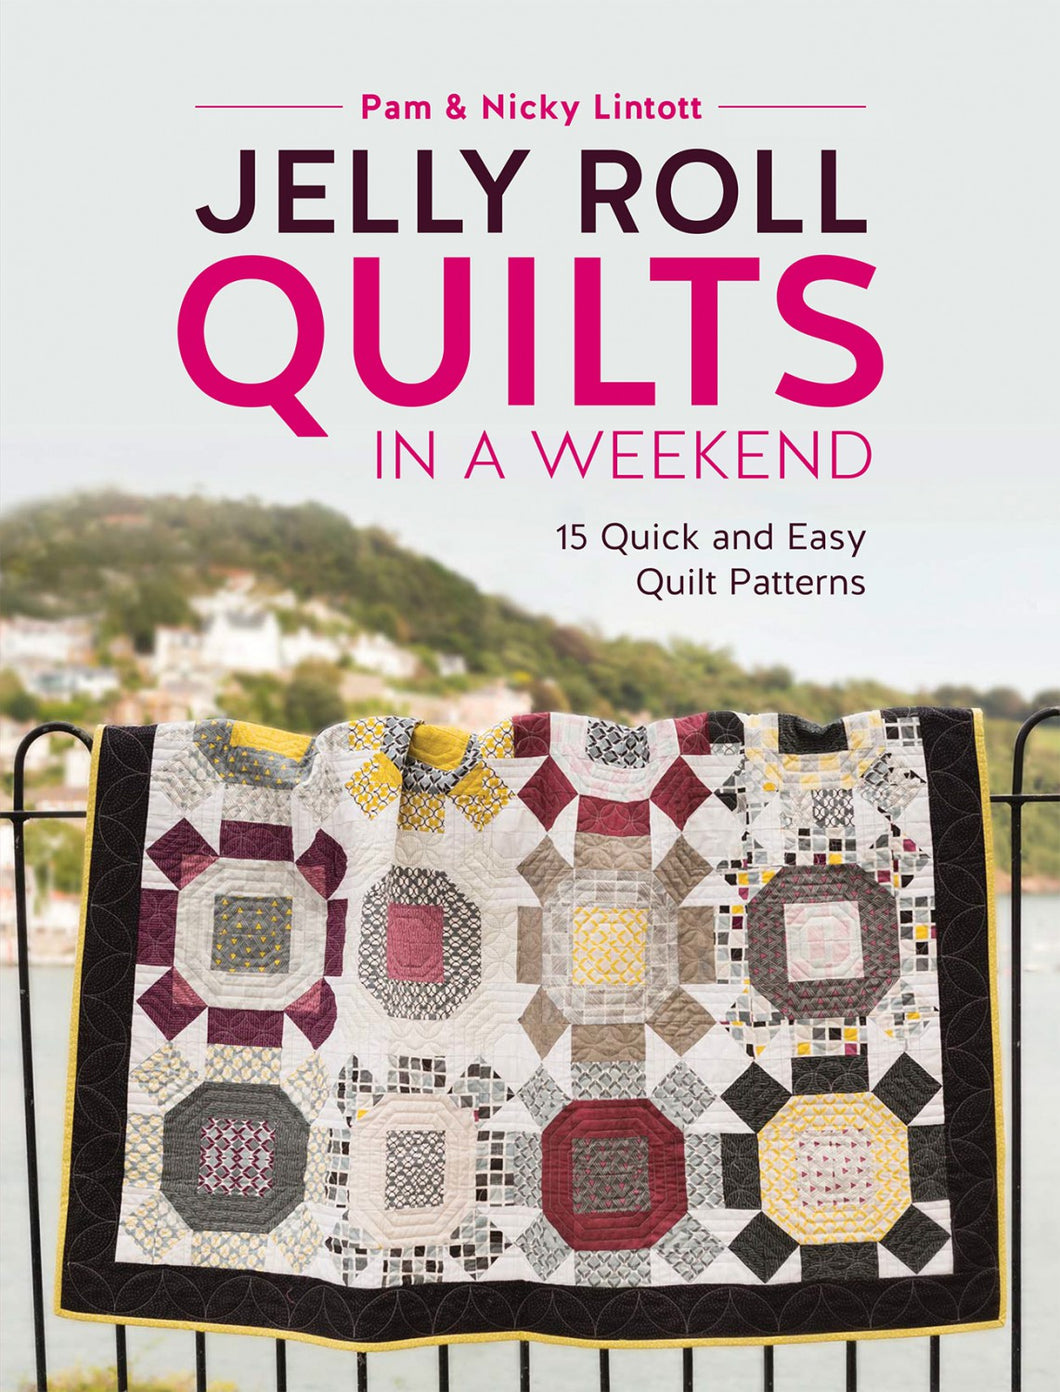 Jelly Roll Quilts in a Weekend by Pam & Nicky Lintott